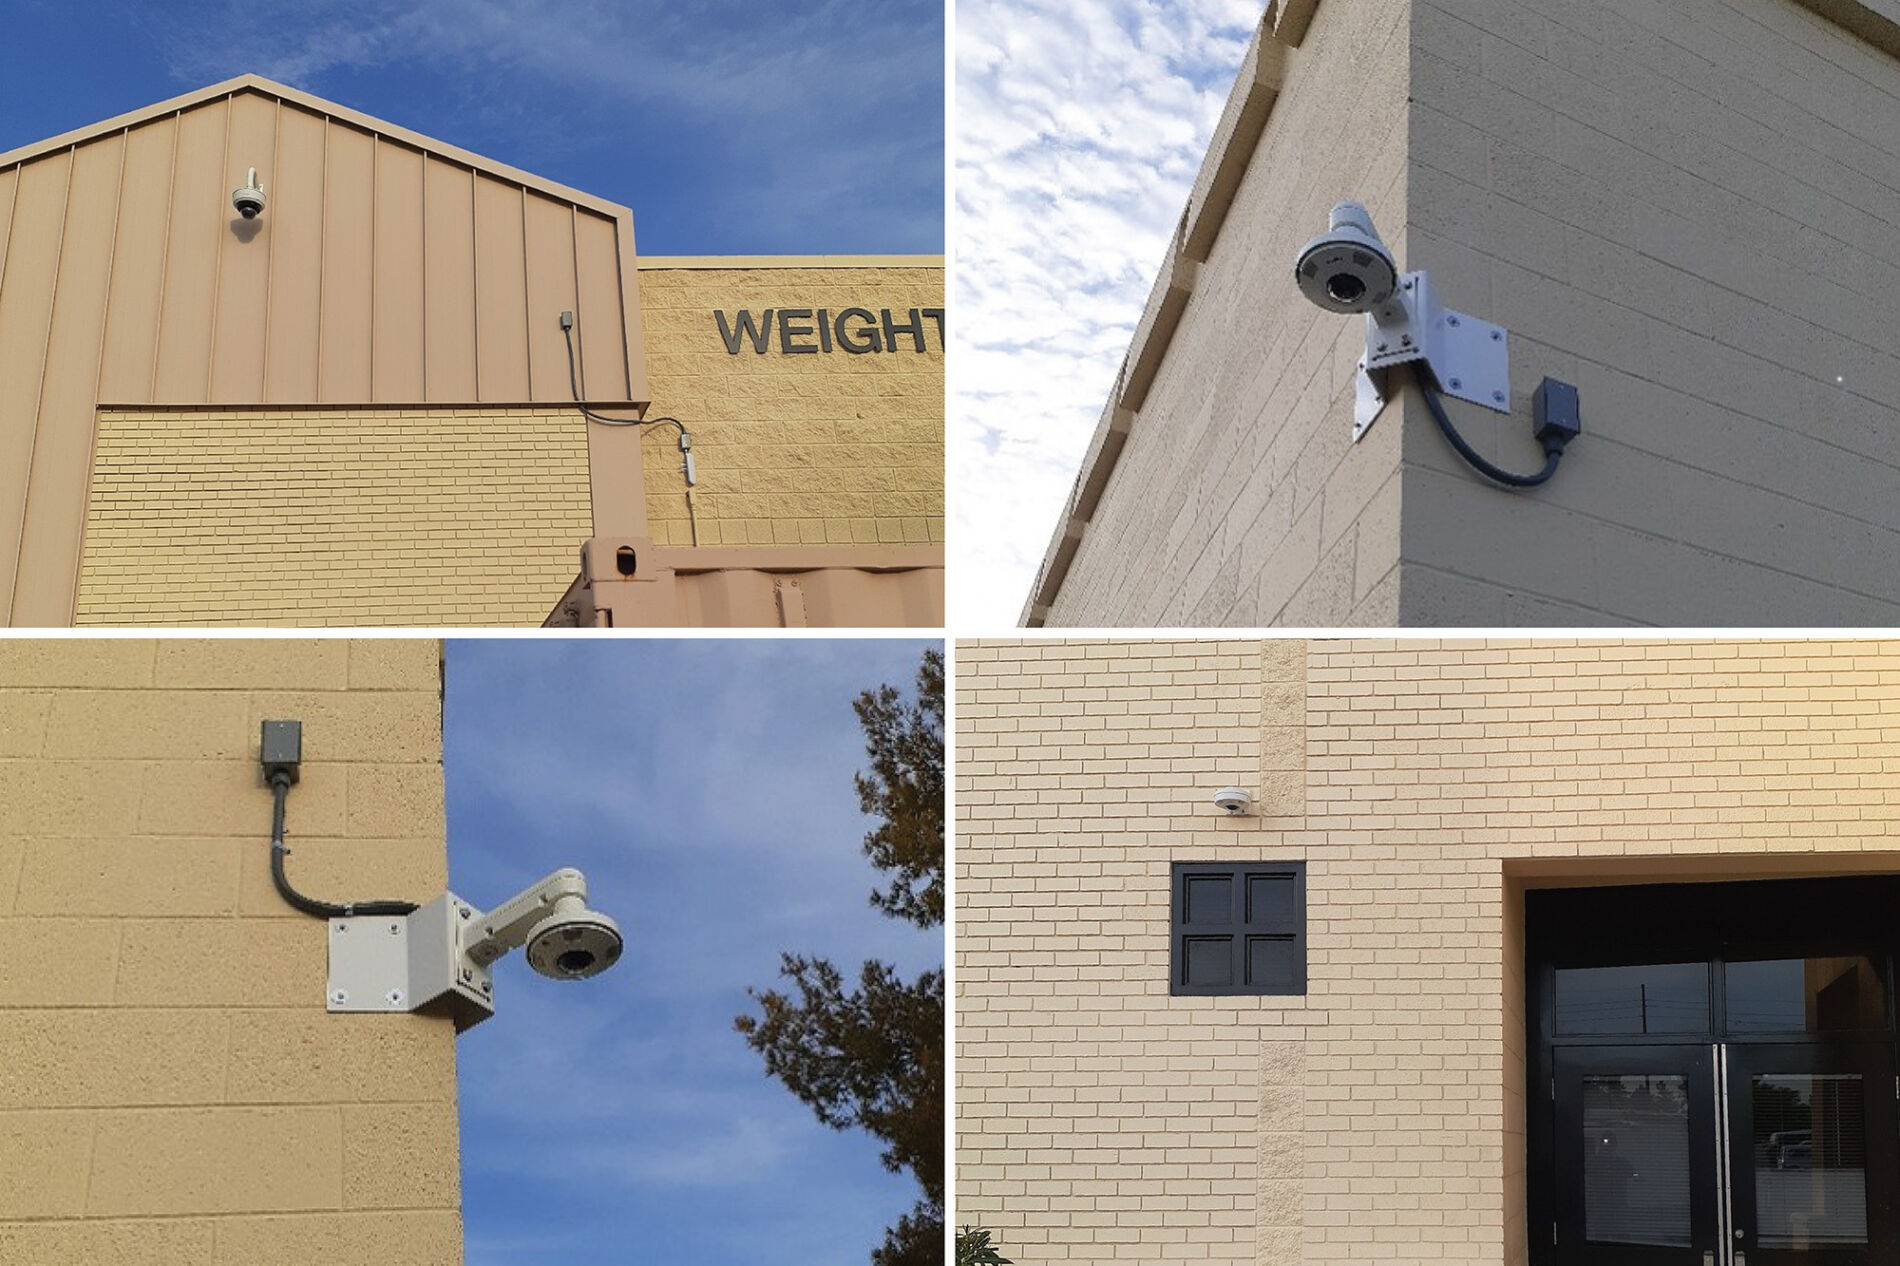 Improved Surveillance Increases Safety and Security for Students and Staff